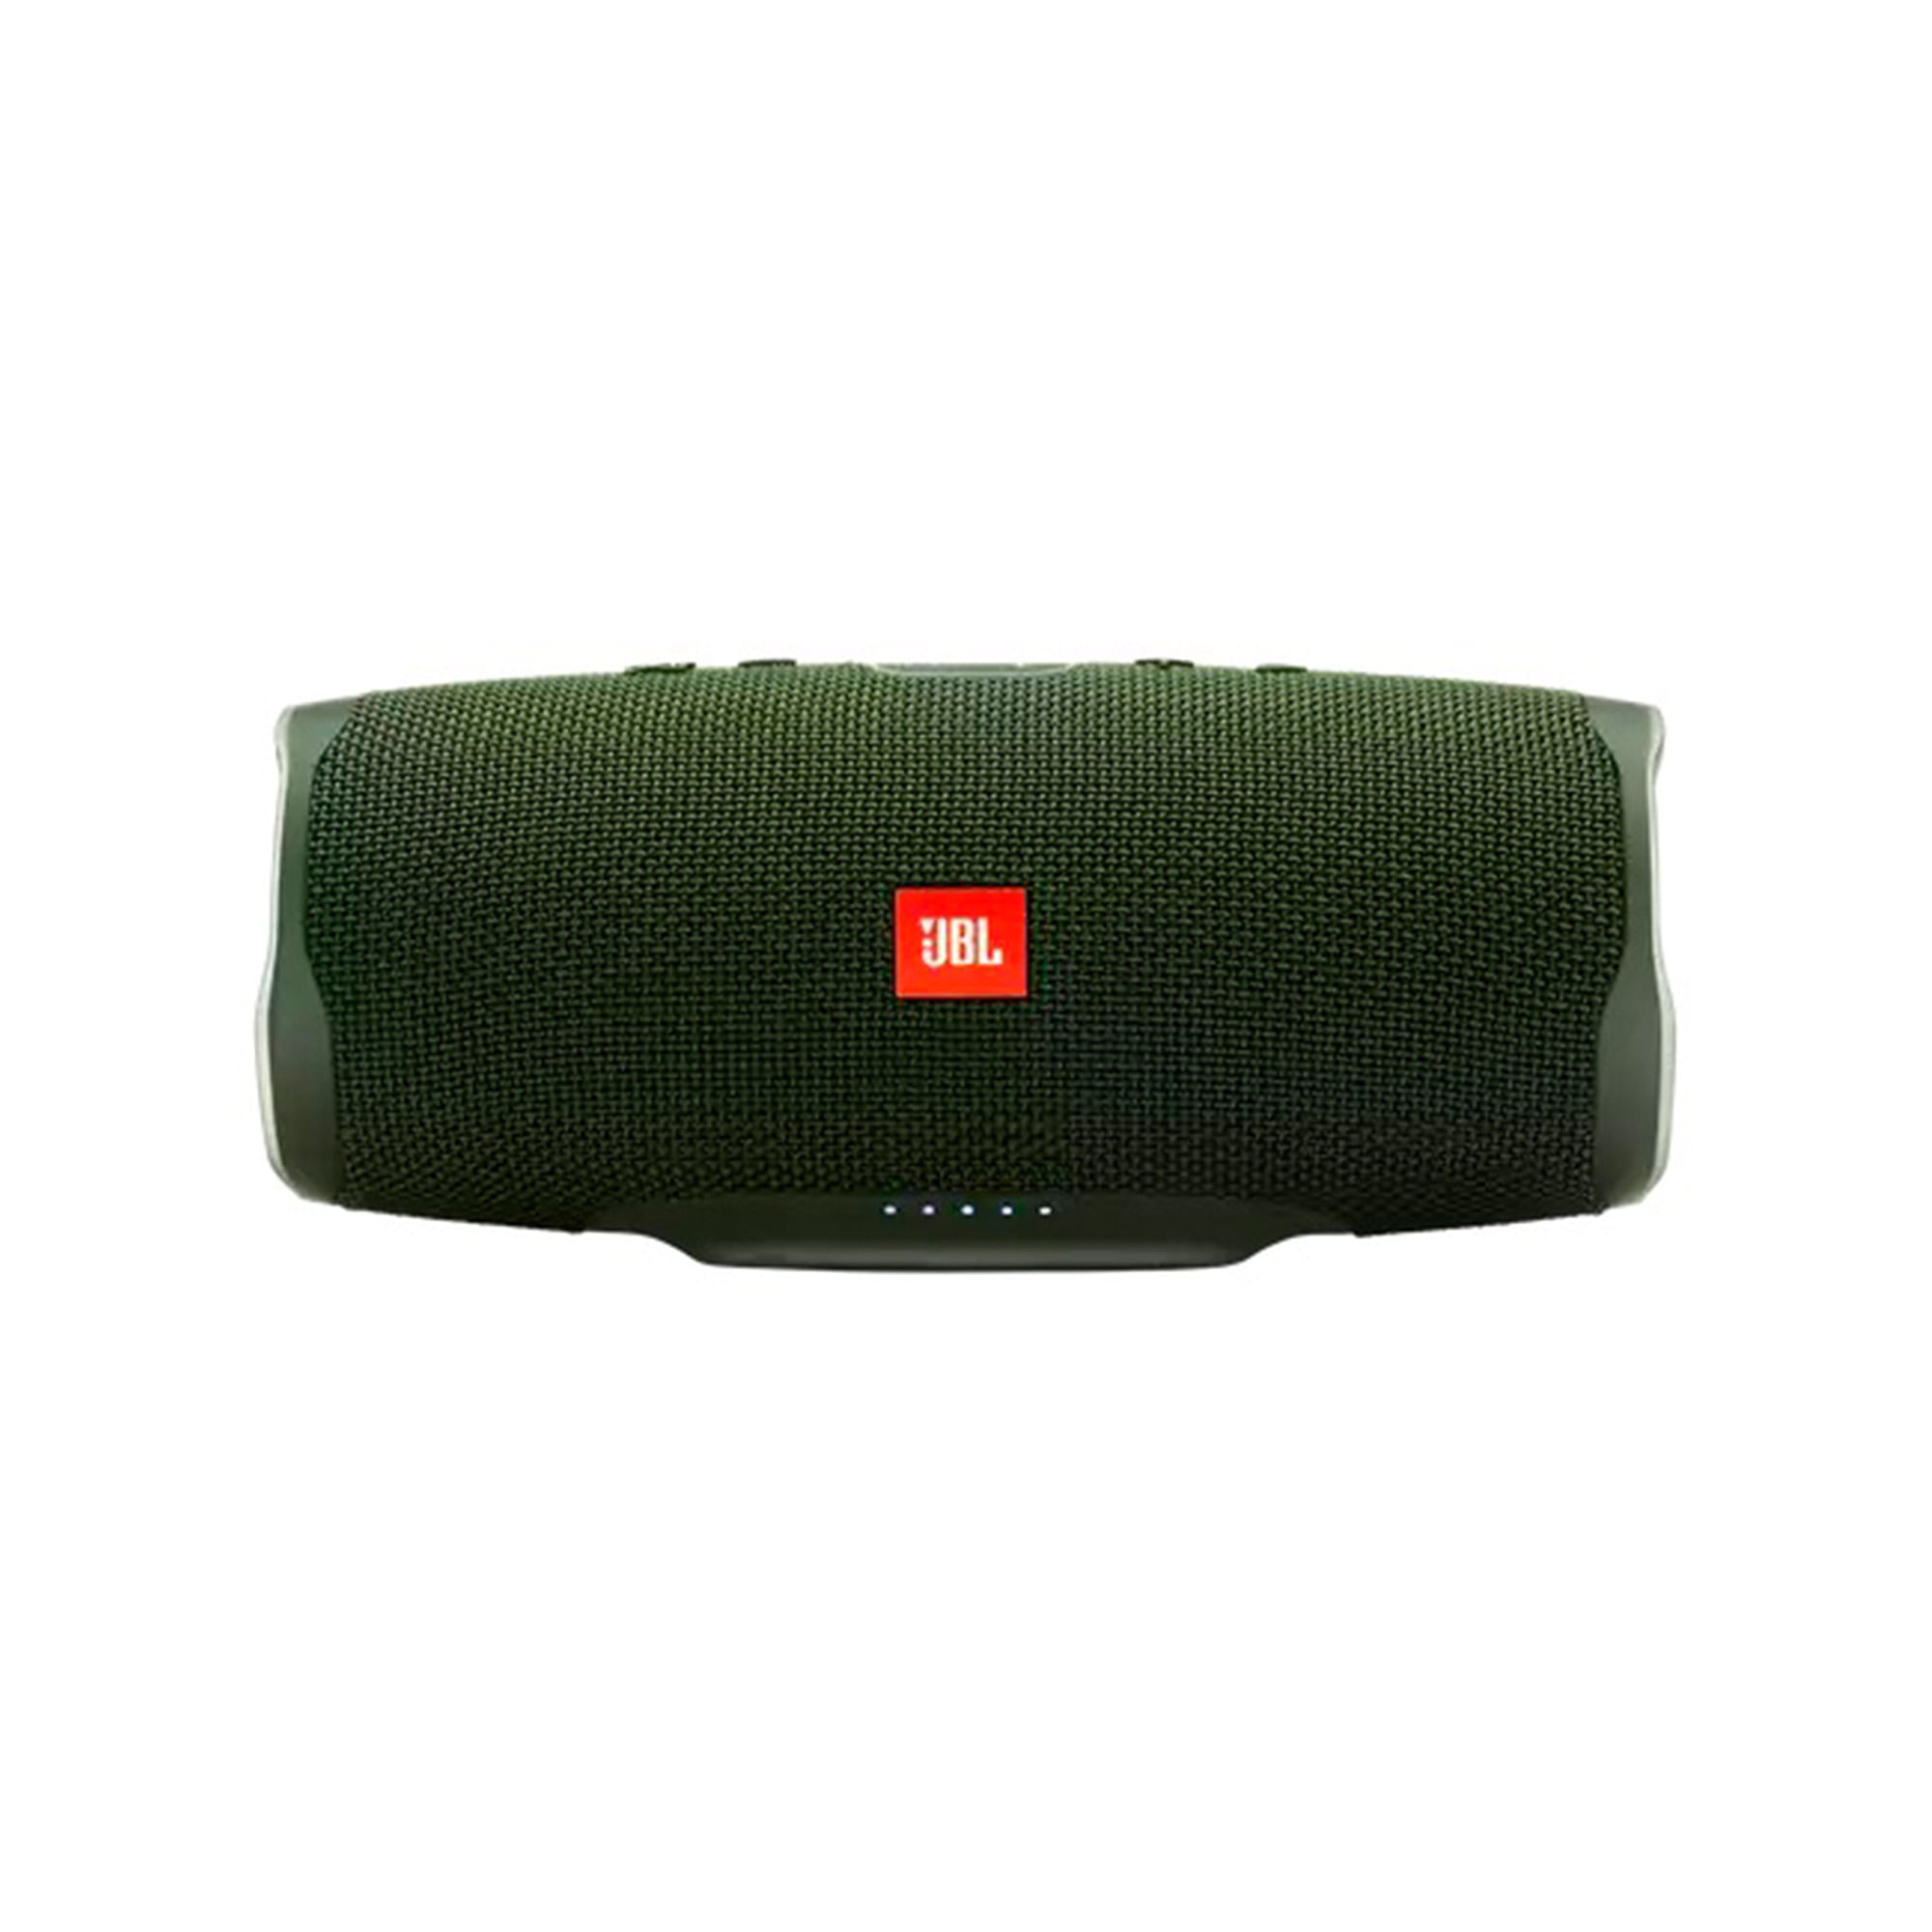 Parlante JBL Charge 4